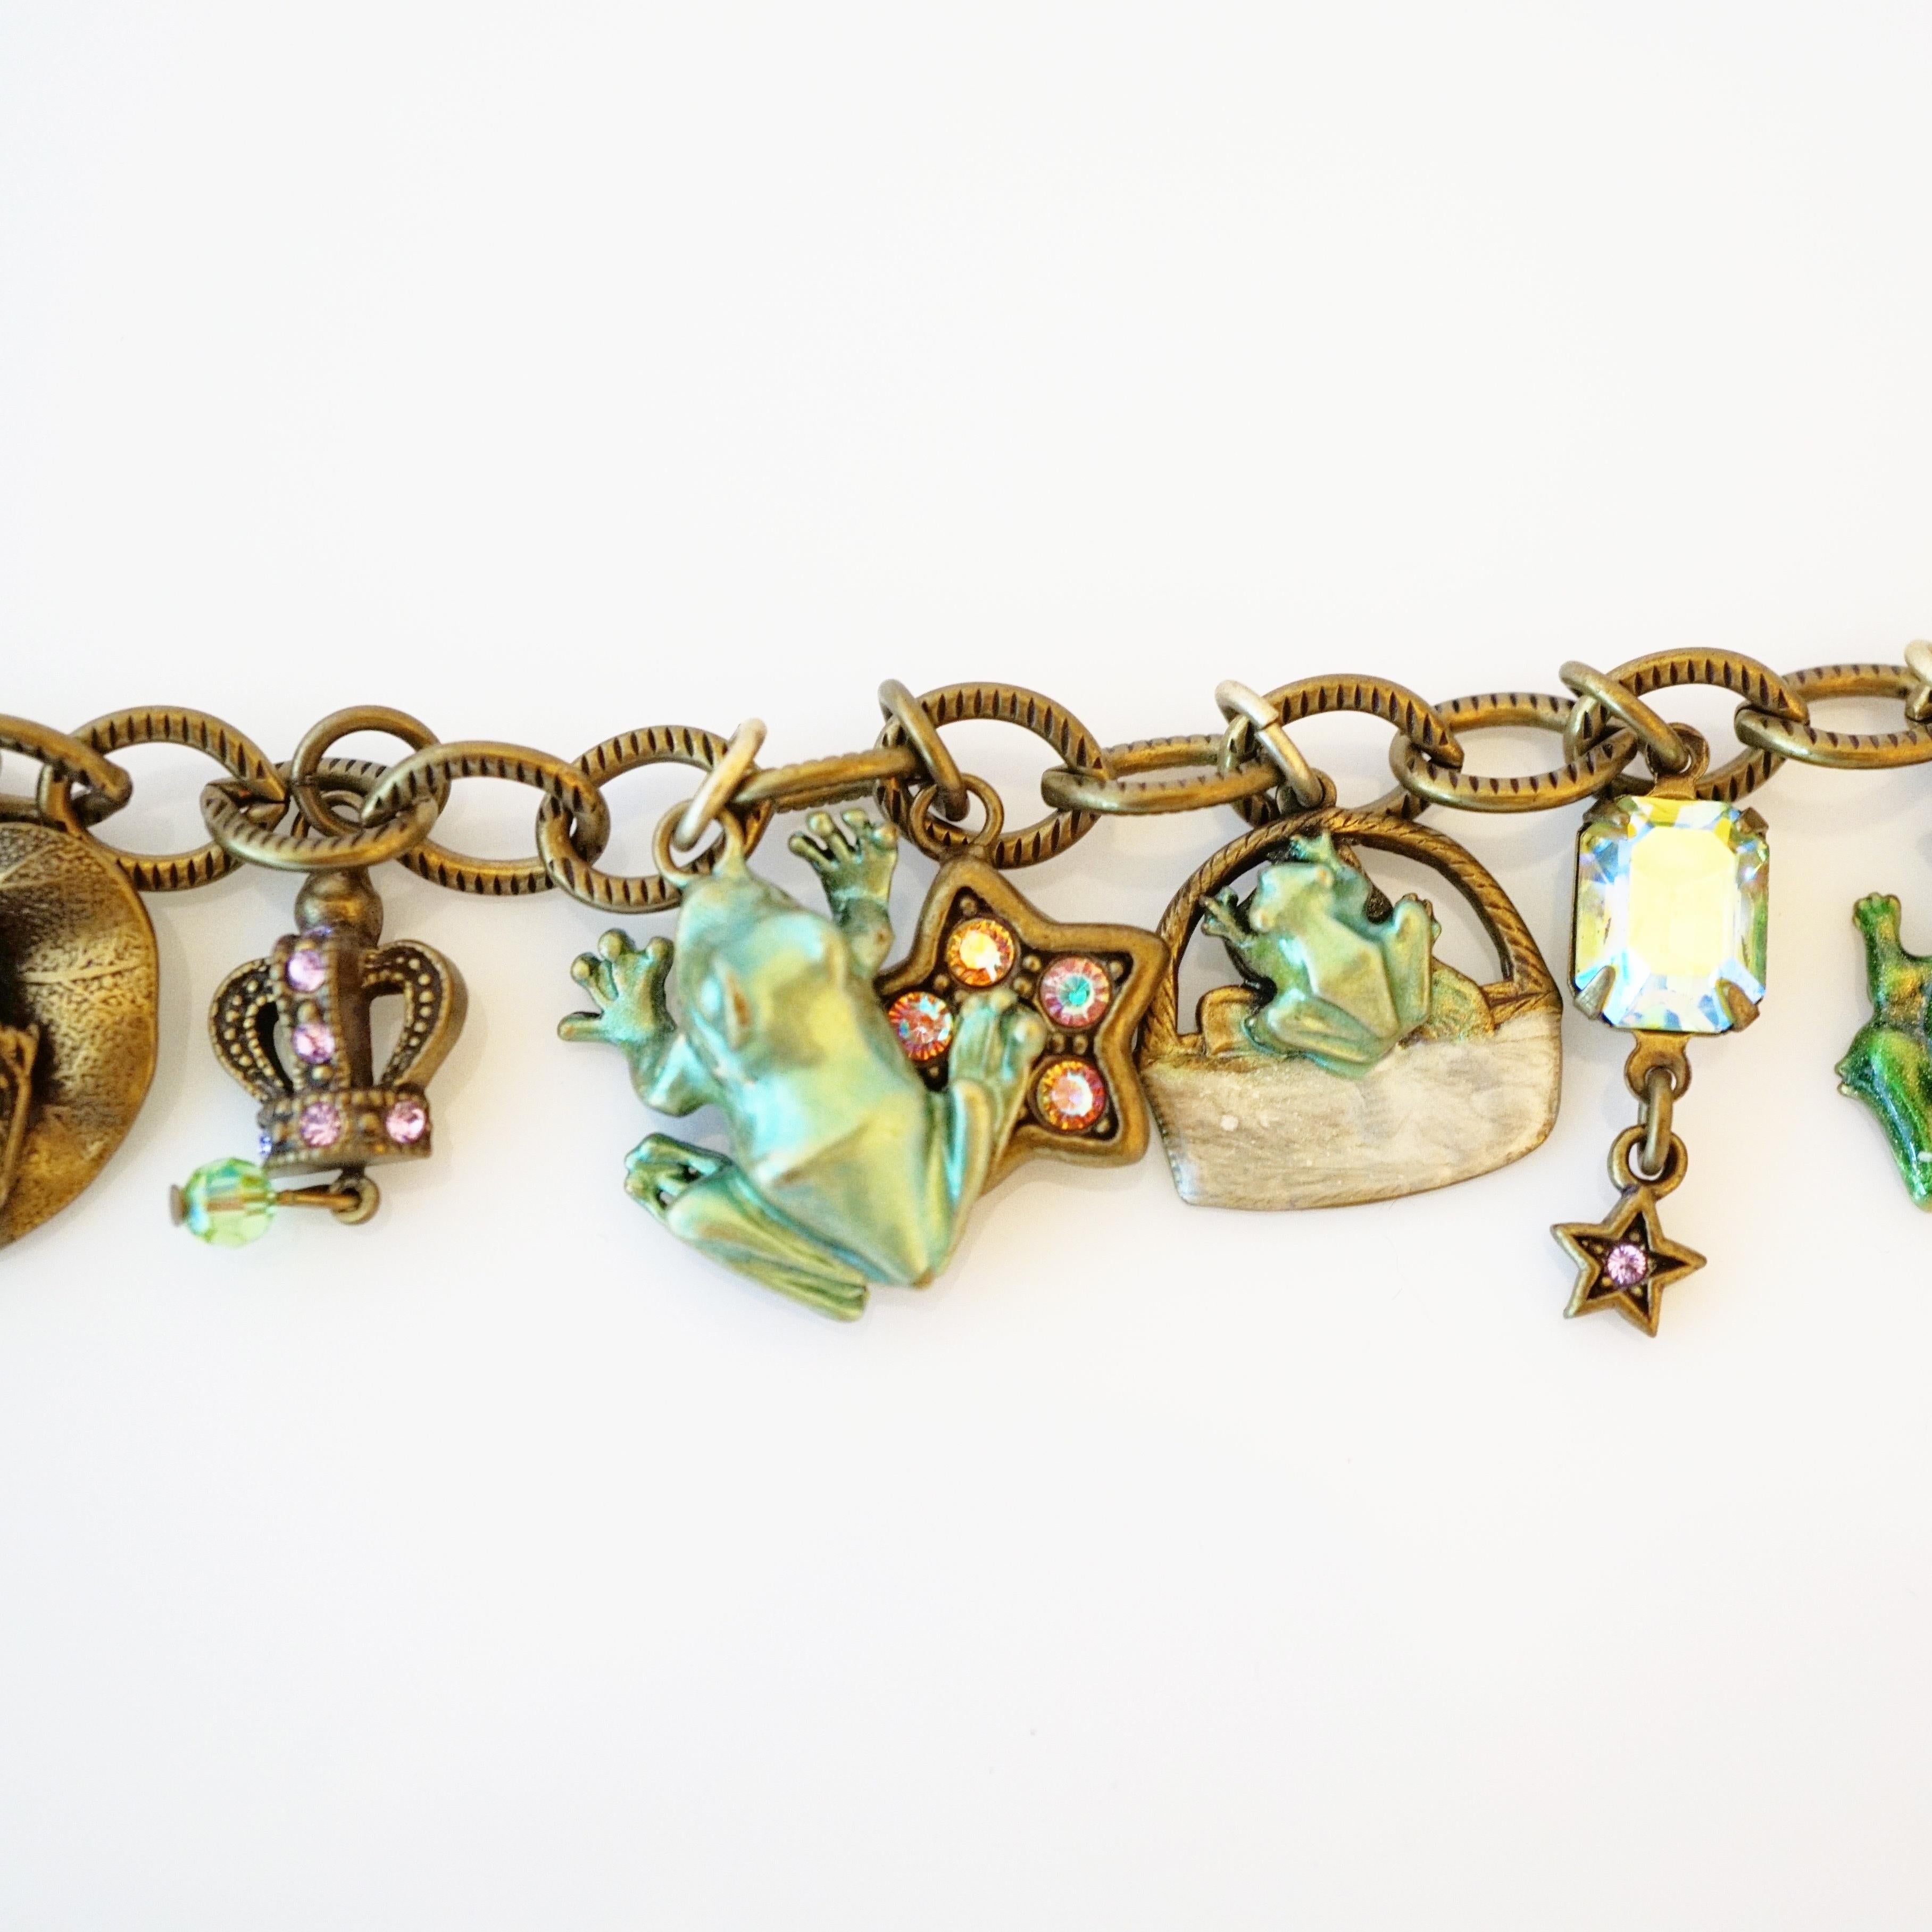 Antiqued Brass Frog Charm Bracelet By Kirks Folly, 1990s In Good Condition For Sale In McKinney, TX